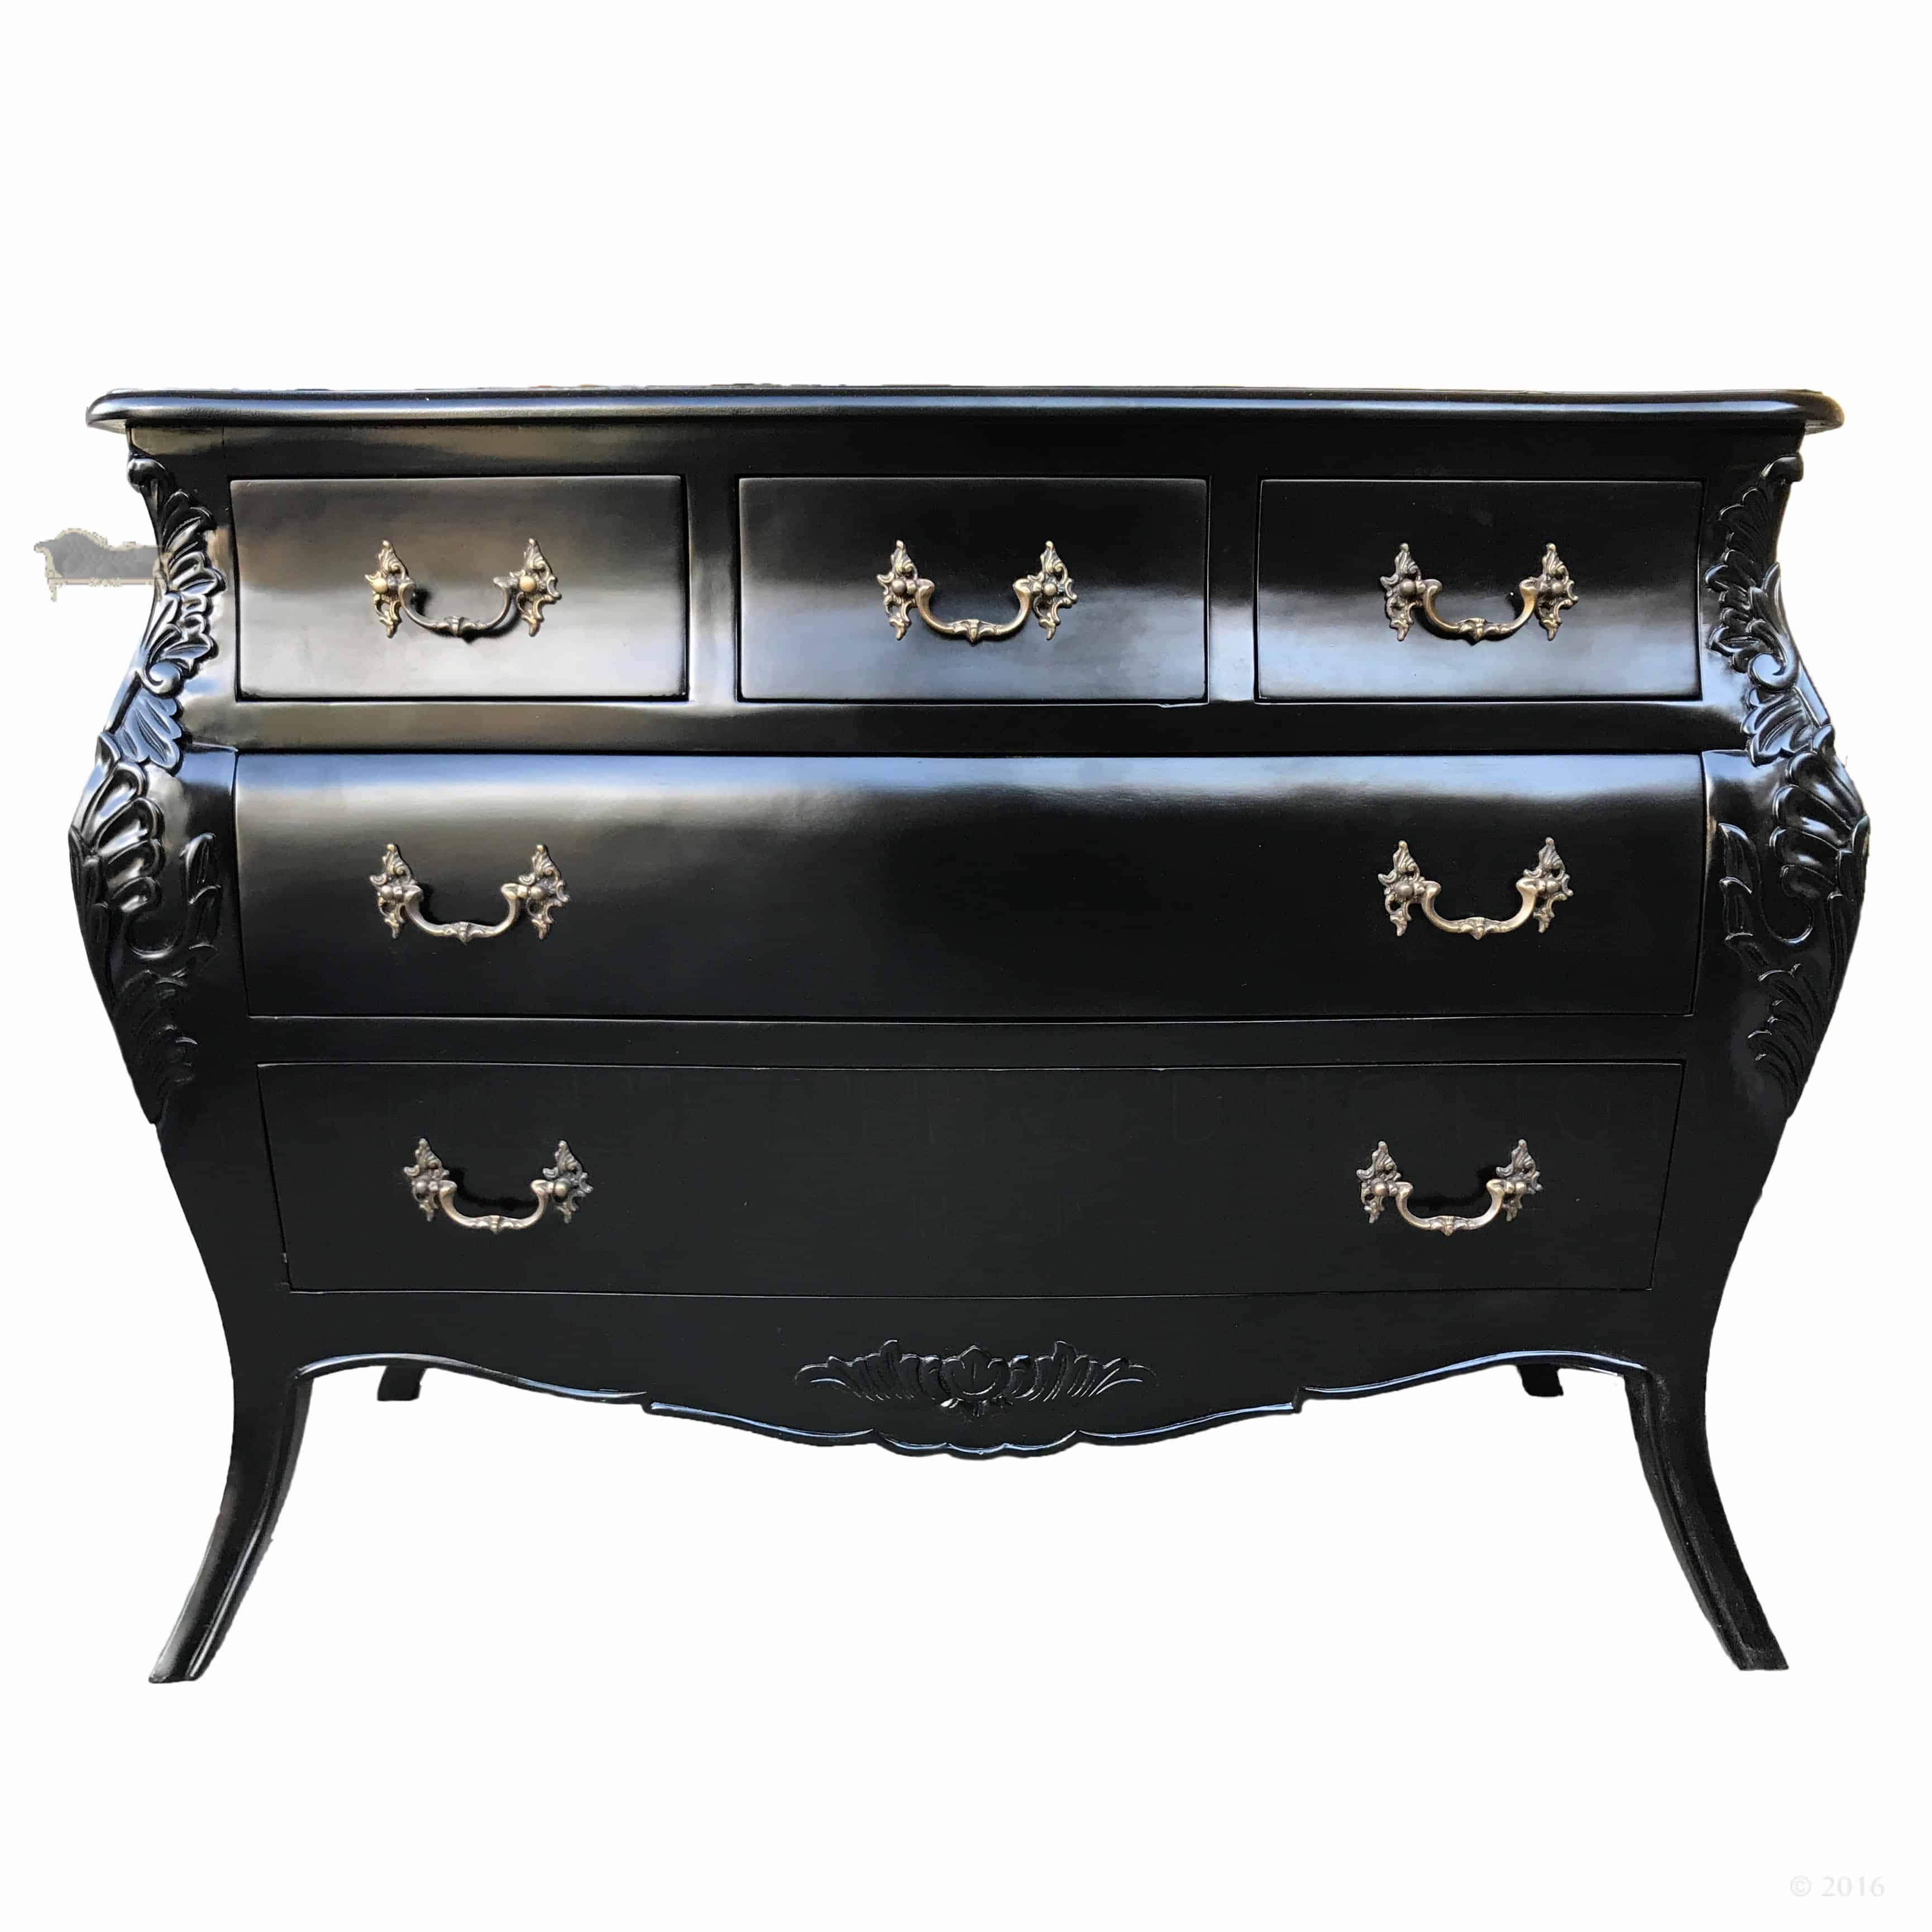 Bombay Chest 5 Drawers Black French Provincial Antique Reproduction Shop